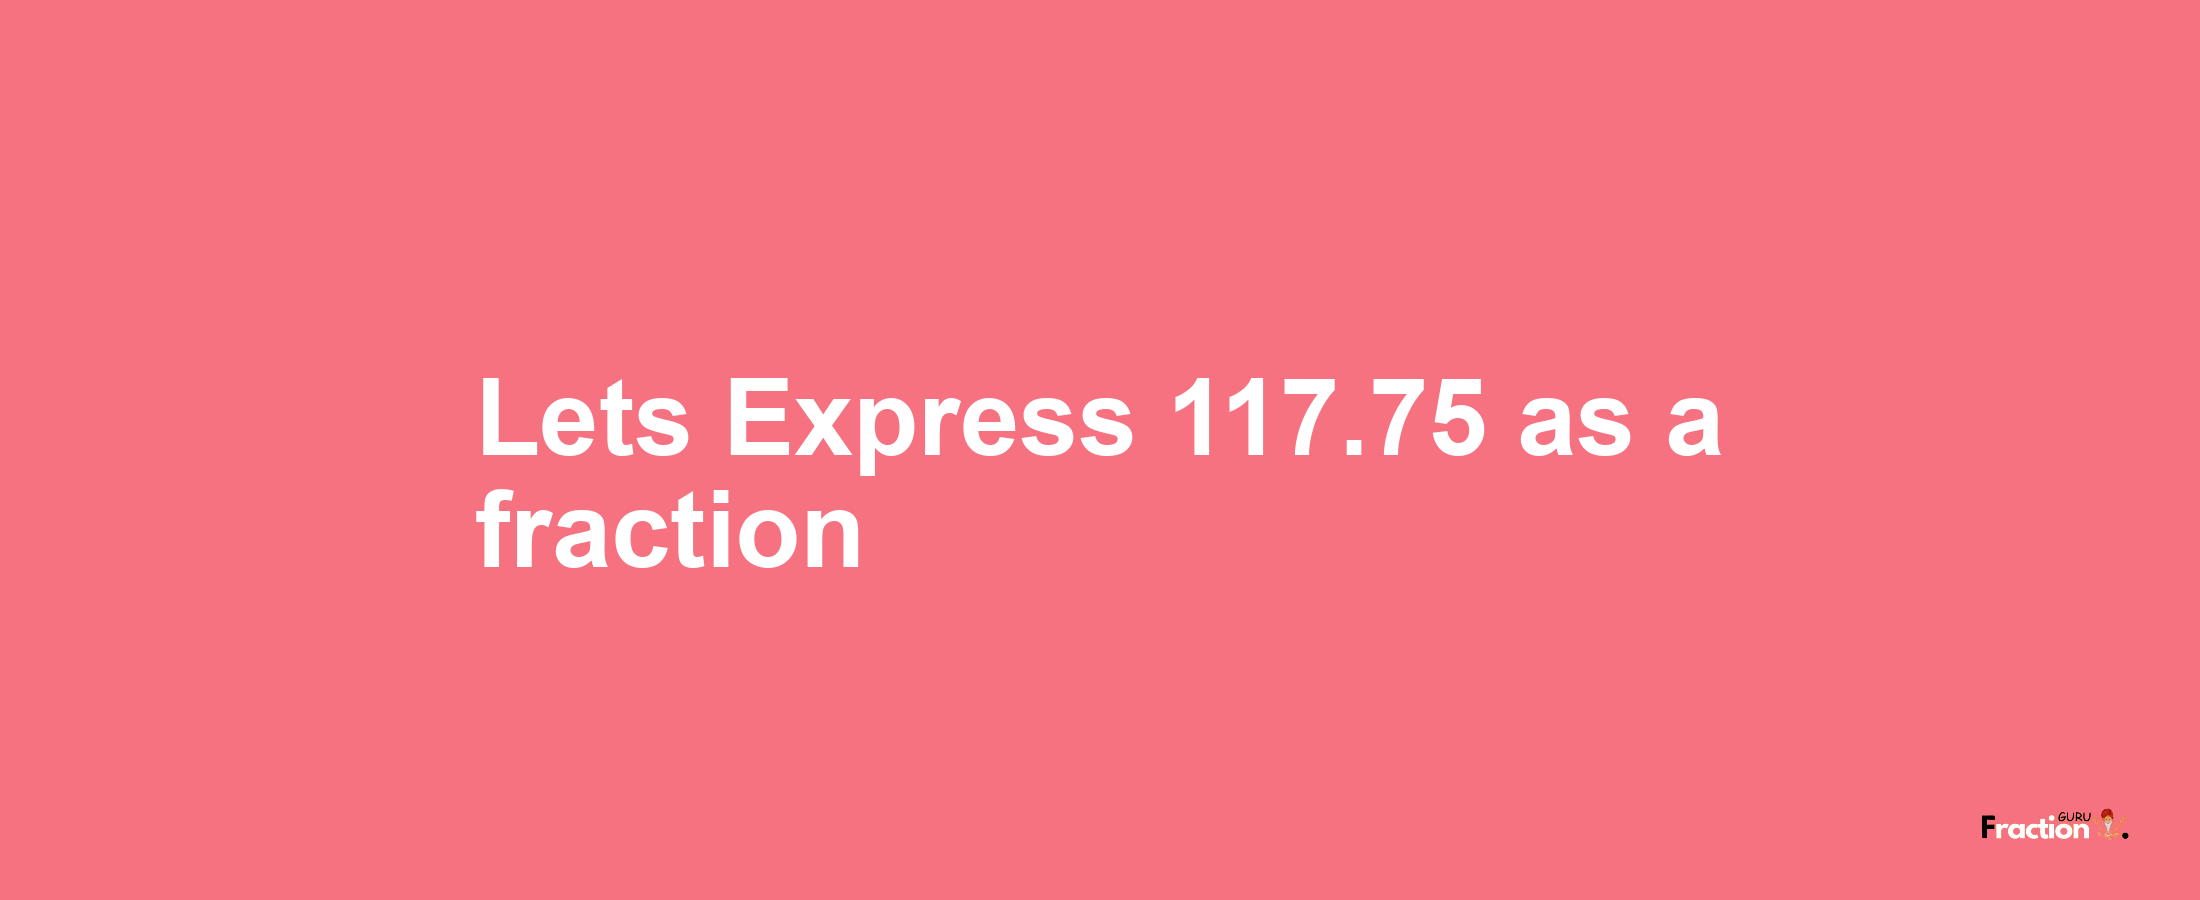 Lets Express 117.75 as afraction